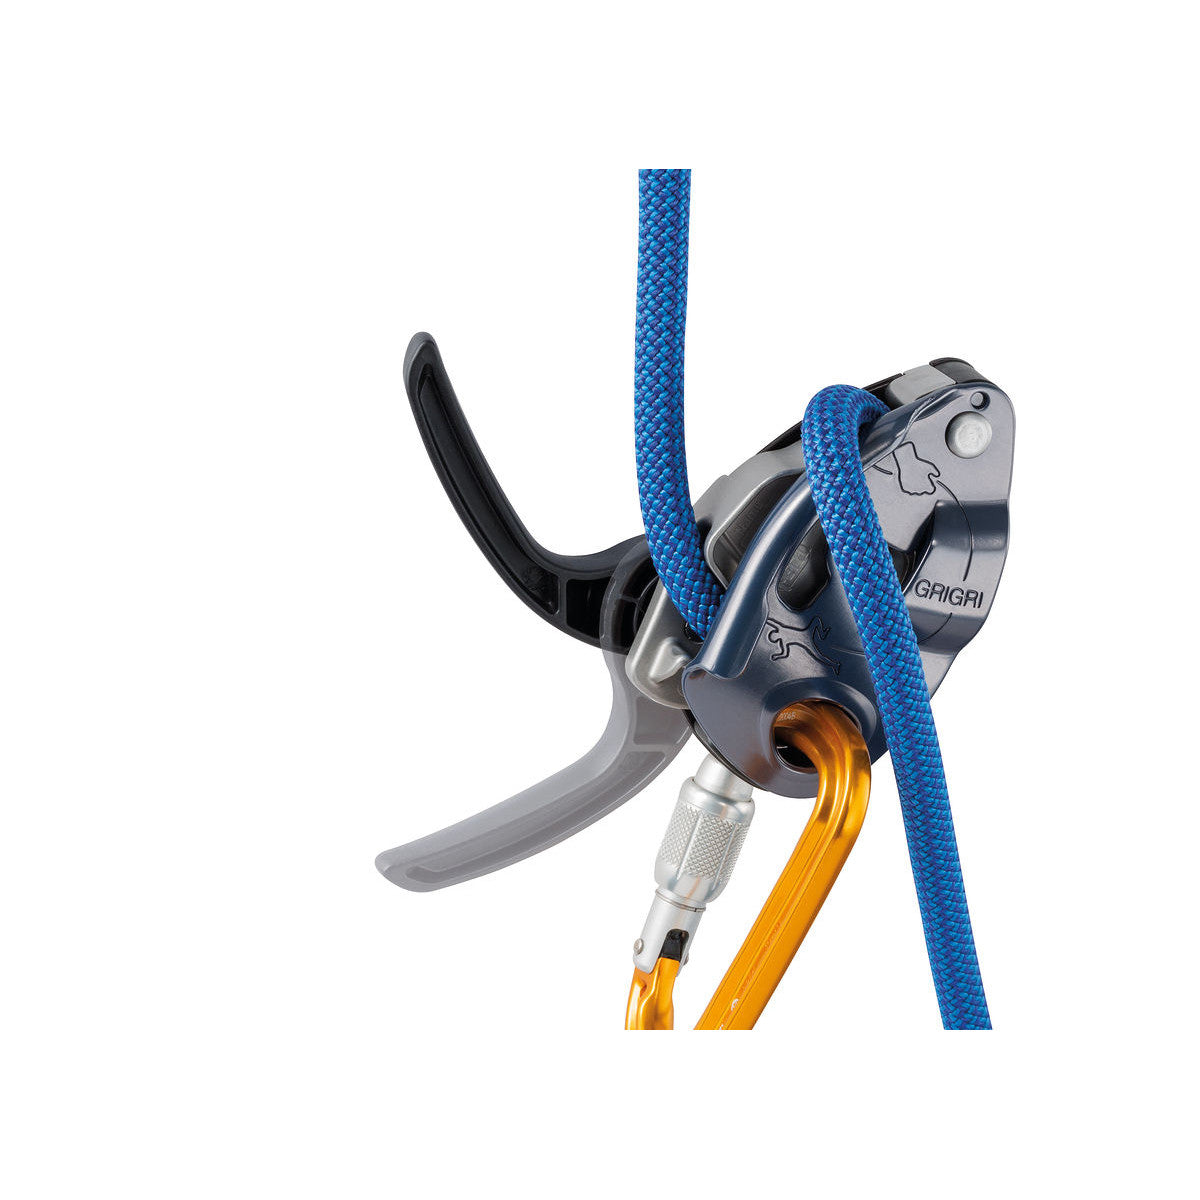 Petzl Grigri belay device in silver colour, shown in use with blue rope and yellow carabiner